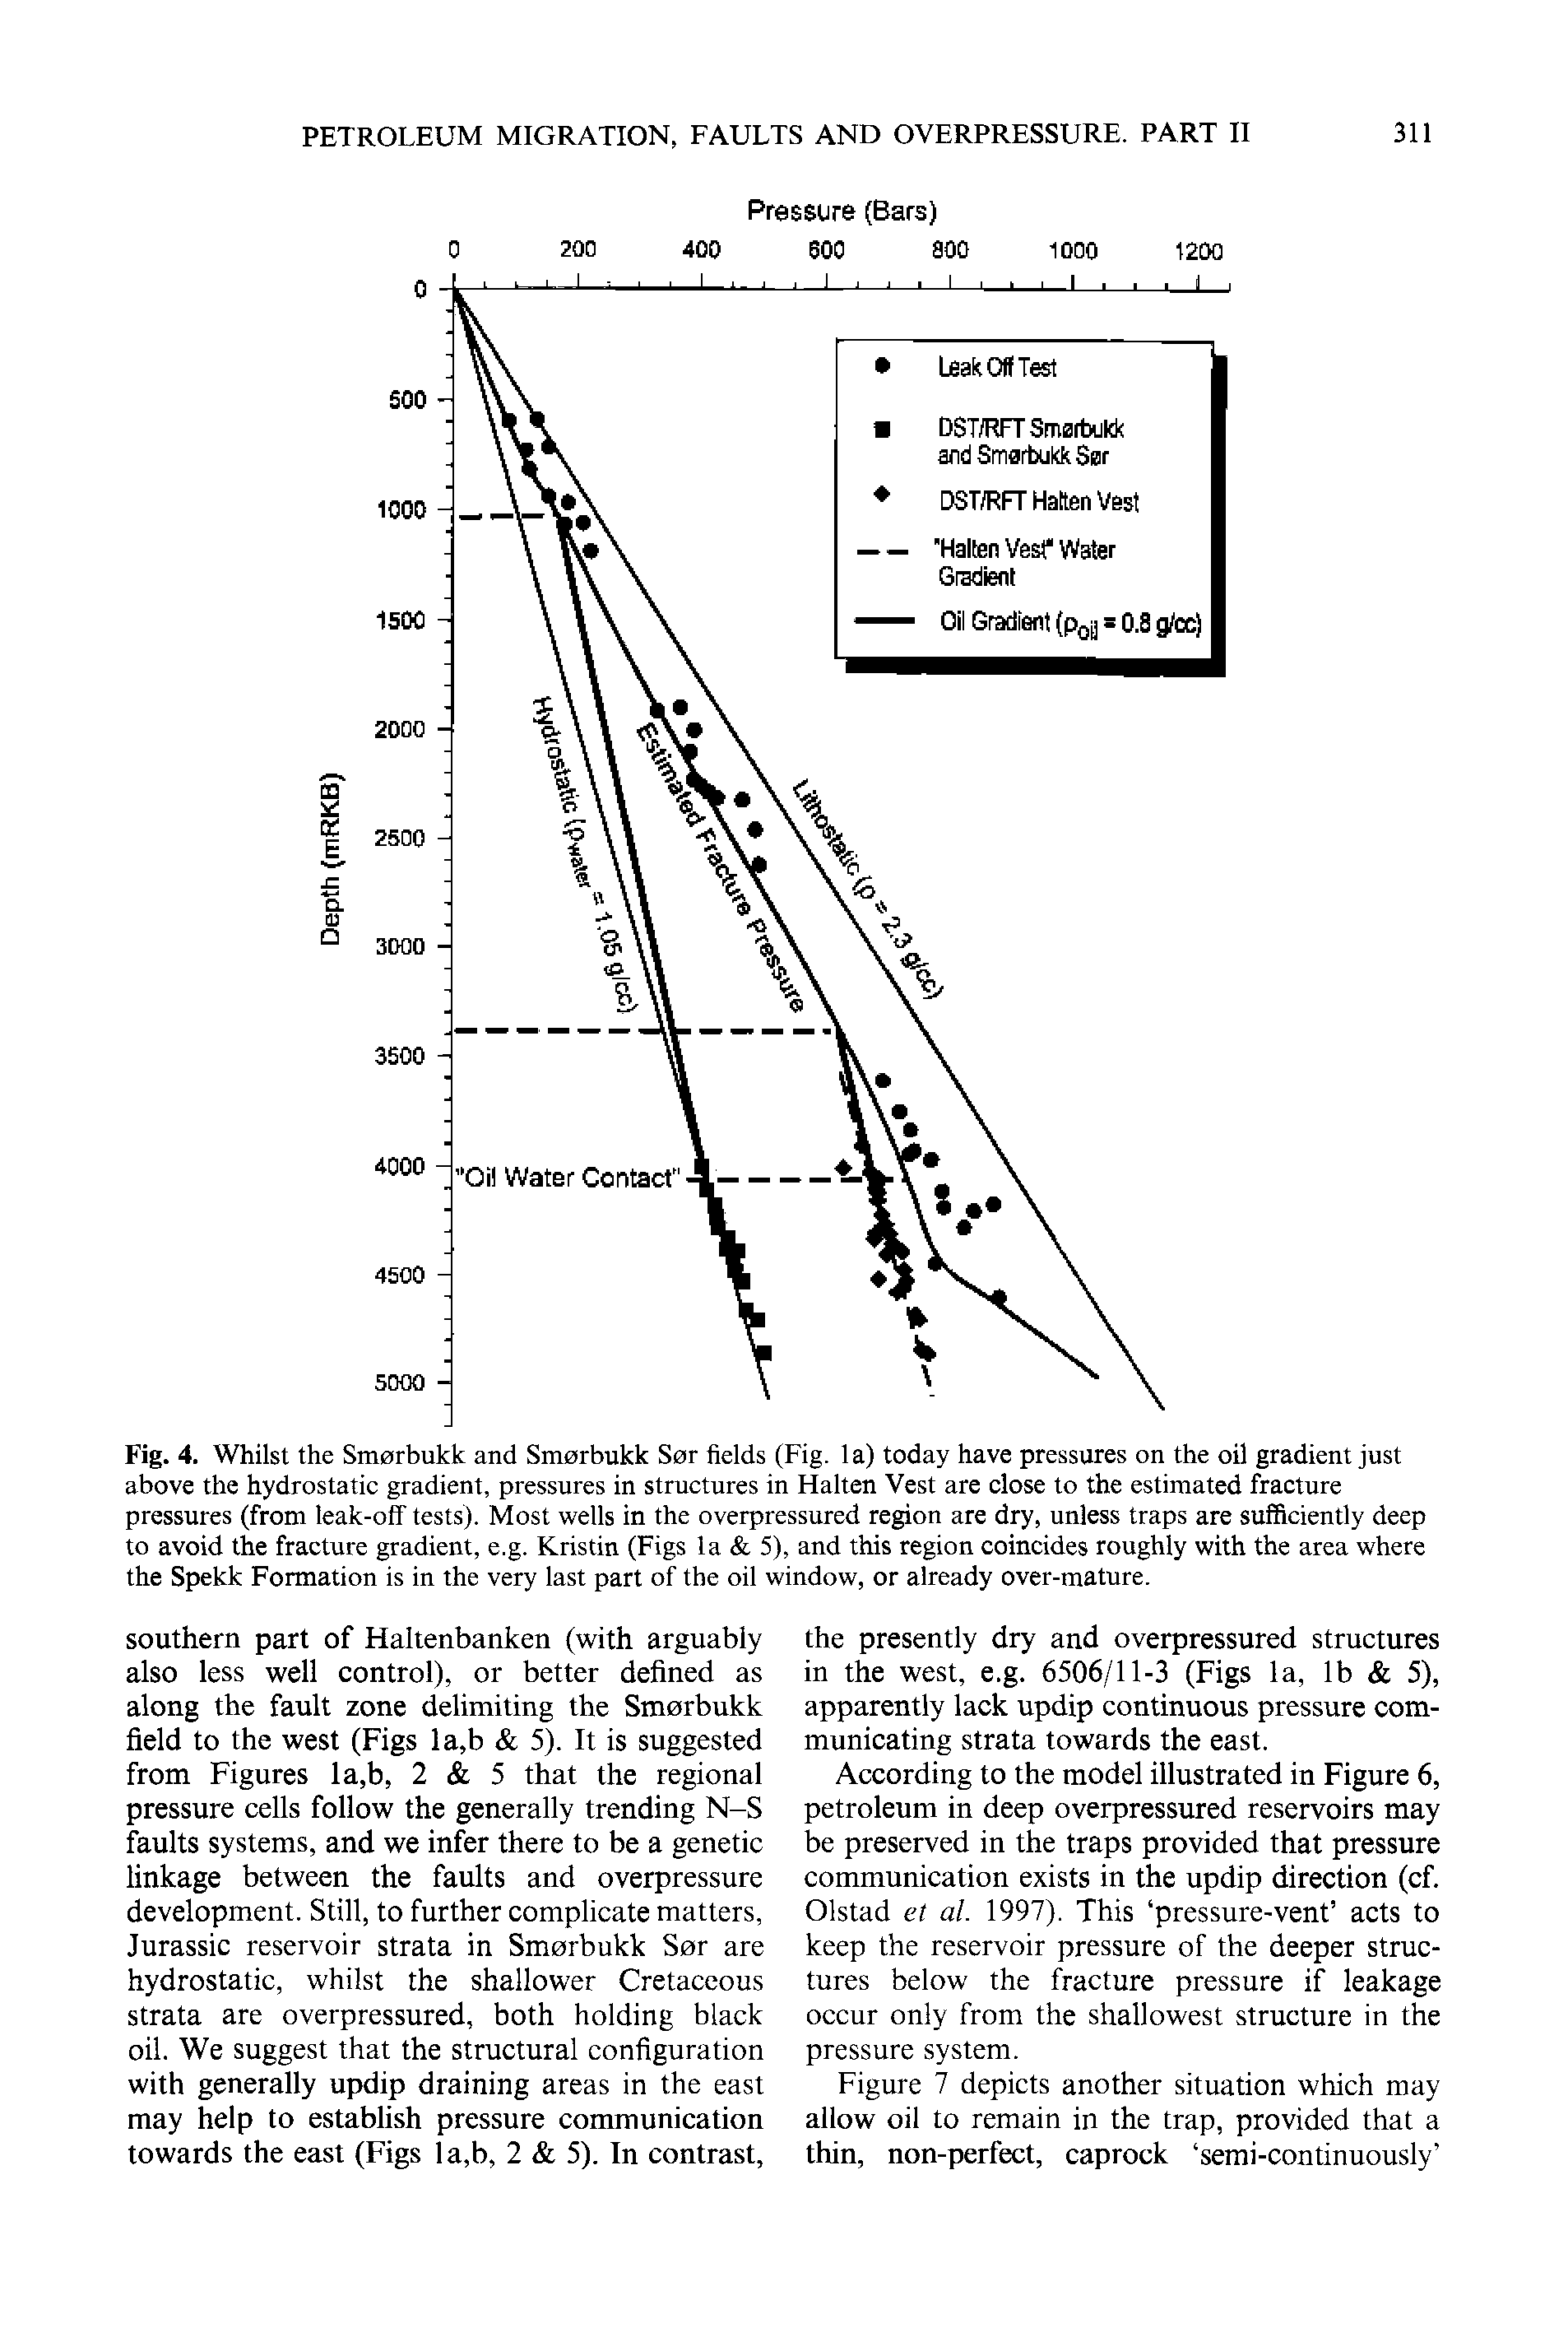 Fig. 4. Whilst the Smerbukk and Smerbukk Ser fields (Fig. la) today have pressures on the oil gradient just above the hydrostatic gradient, pressures in structures in Halten Vest are close to the estimated fracture pressures (from leak-off tests). Most wells in the overpressured region are dry, unless traps are sufficiently deep to avoid the fracture gradient, e.g. Kristin (Figs la 5), and this region coincides roughly with the area where the Spekk Formation is in the very last part of the oil window, or already over-mature.